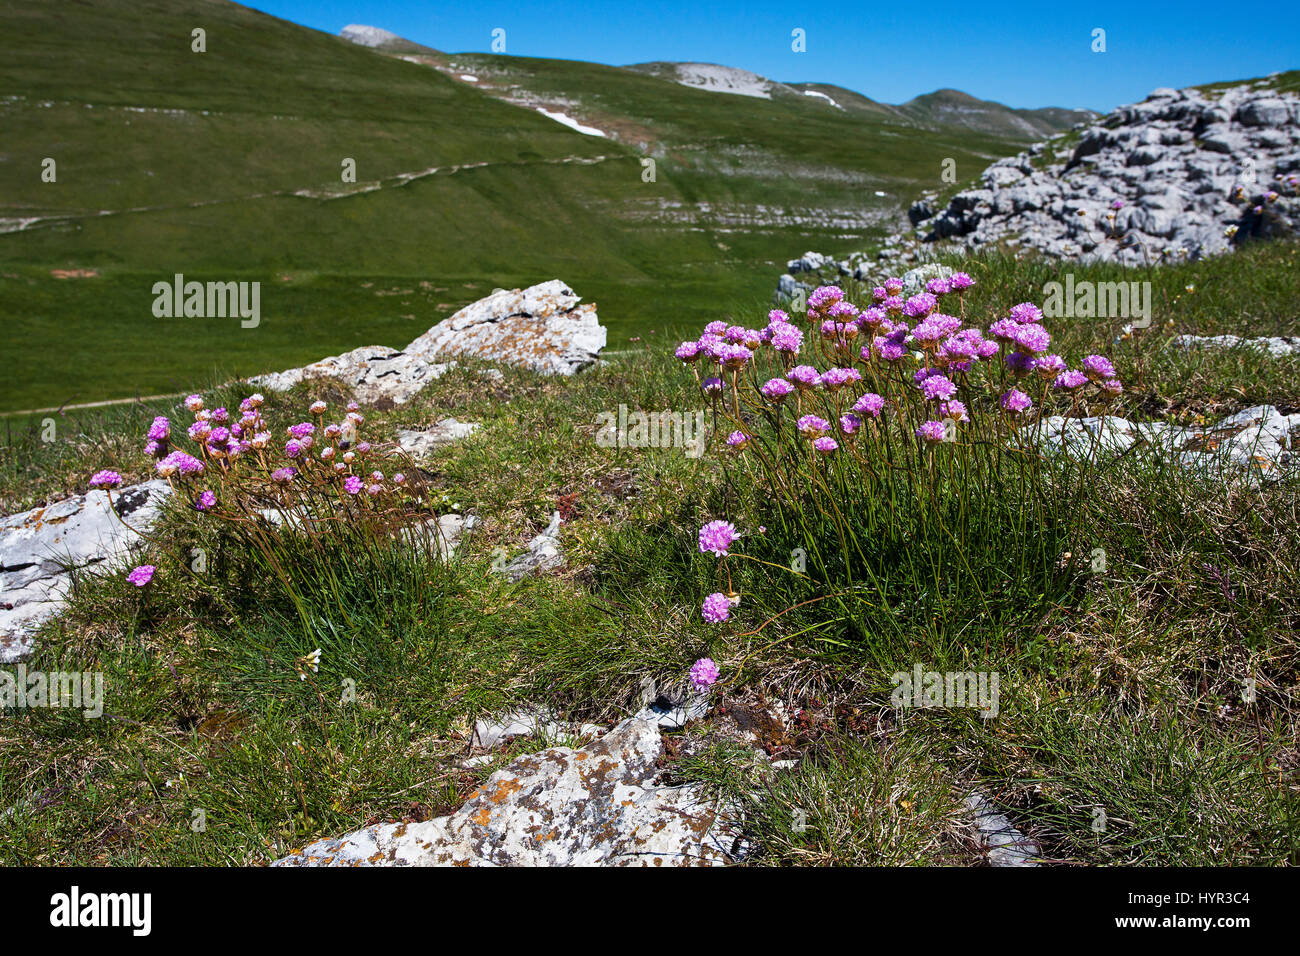 Mountain thrift Armeria maritima alpina clump in alpine meadow Font d'Urle Vercors Regional Natural Park Vercors France May 2015 Stock Photo